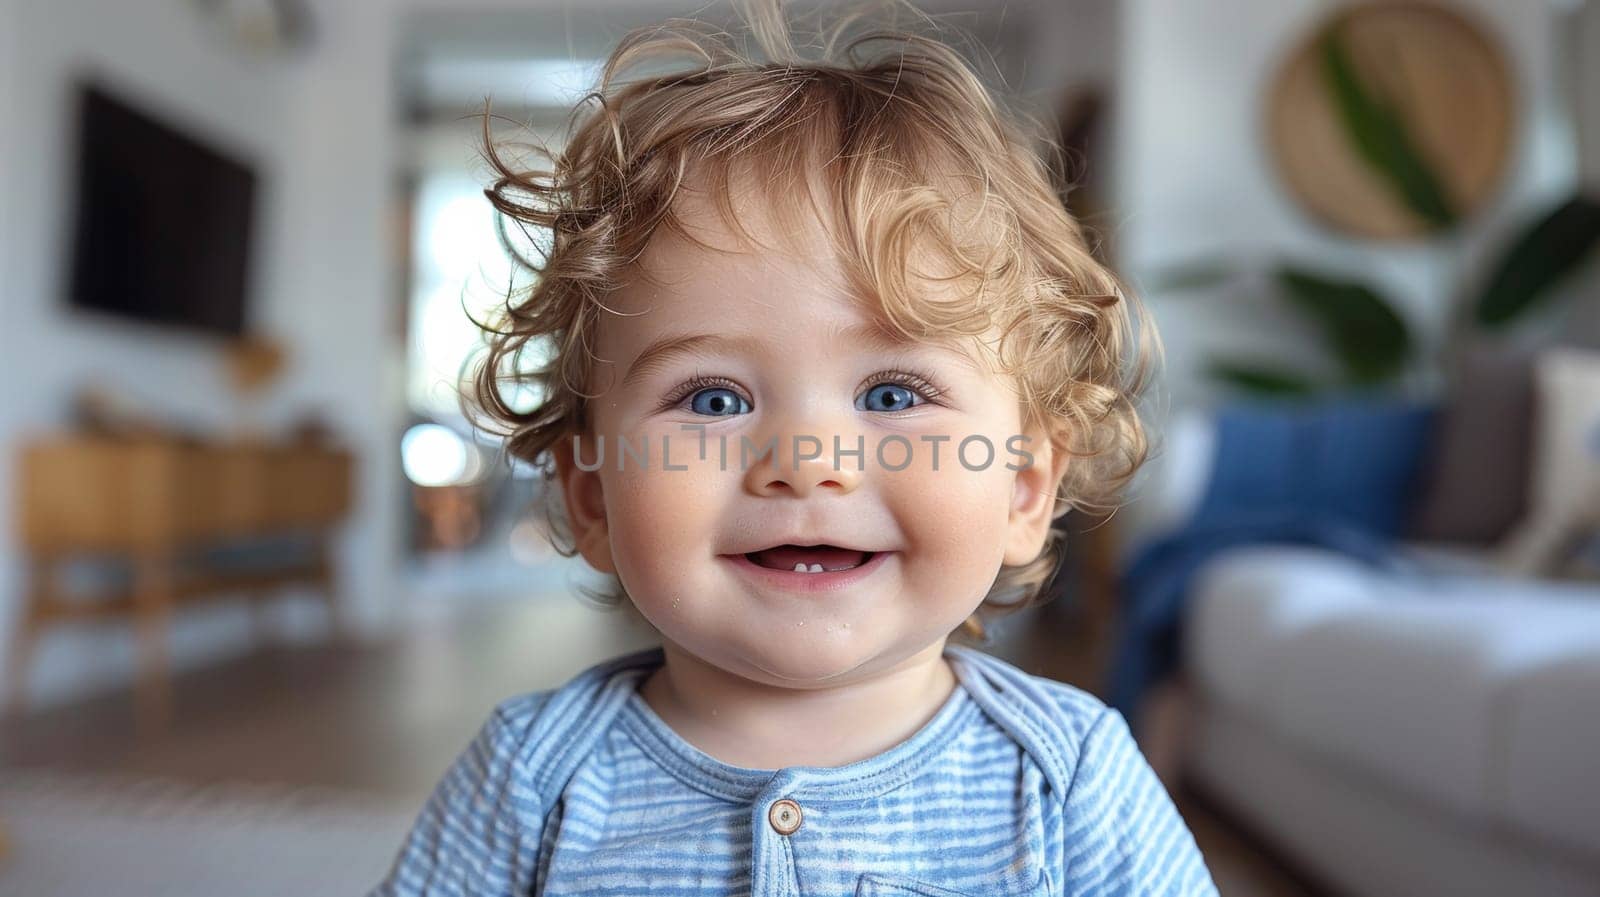 A baby with curly hair smiling in a living room